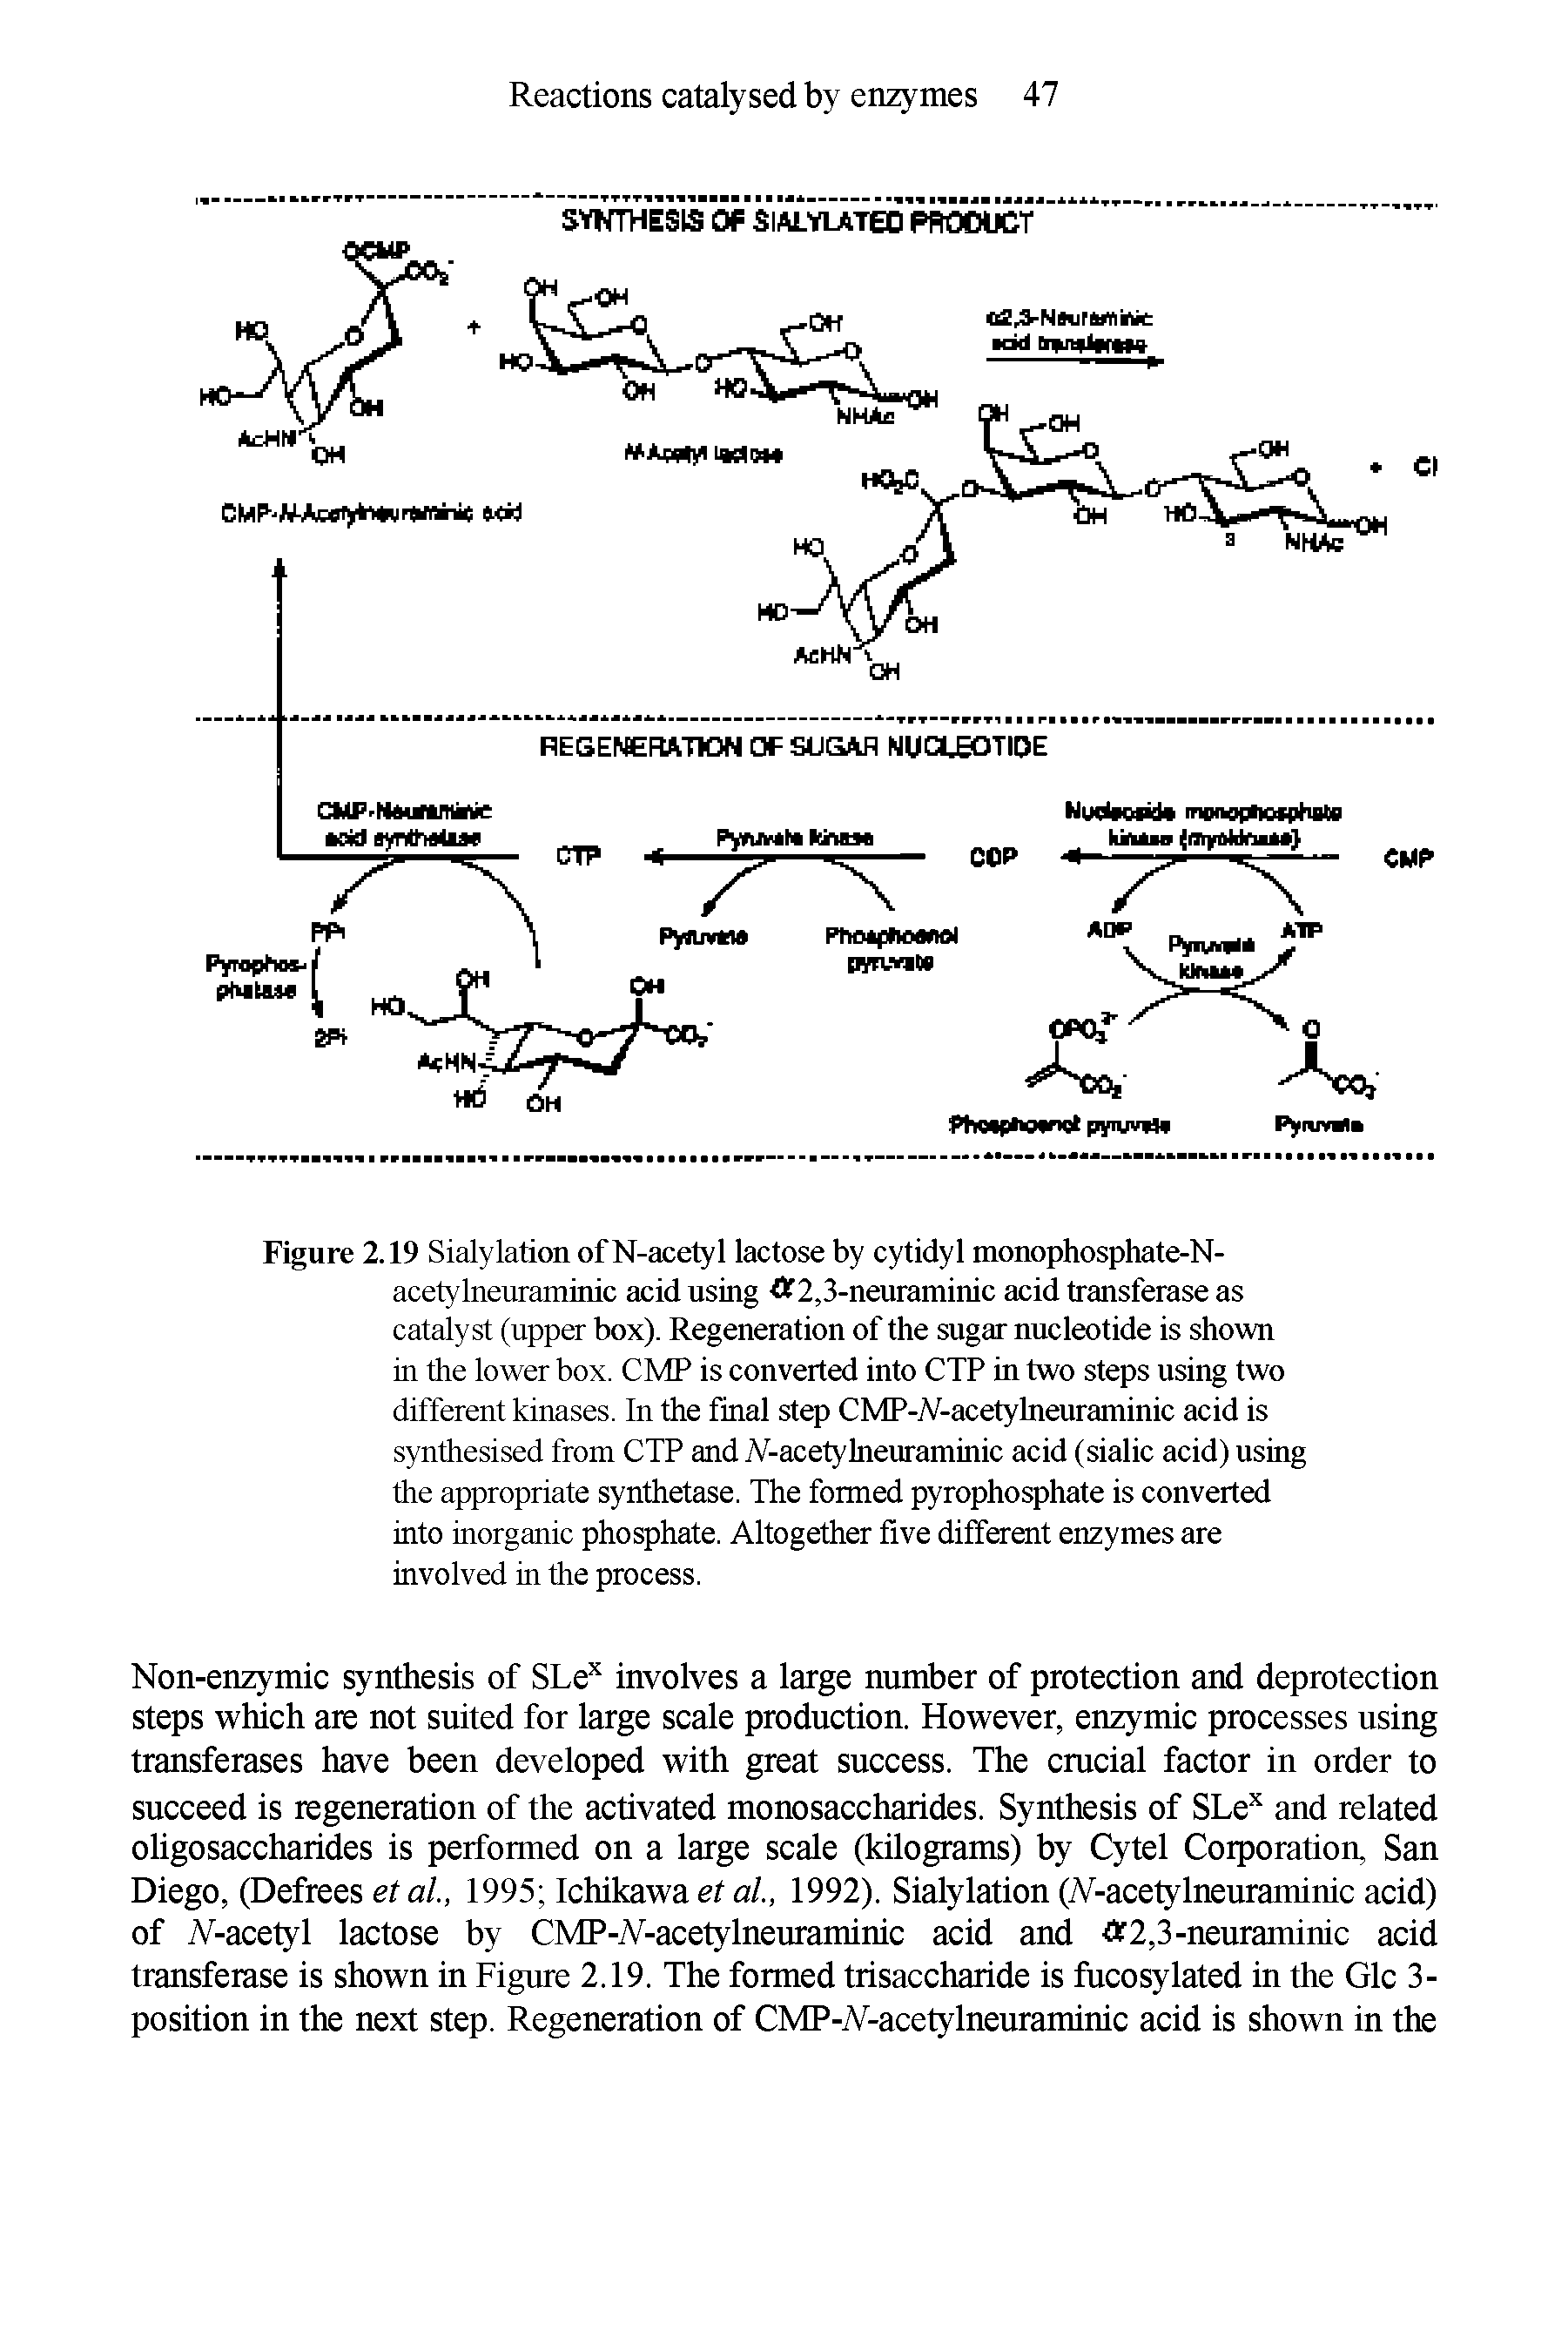 Figure 2.19 Sialylation ofN-acetyl lactose by cytidyl monophosphate-N-acetylneuraminic acid using Of 2,3-neuraminic acid transferase as catalyst (upper box). Regeneration of the sugar nucleotide is shown in the lower box. CMP is converted into CTP in two steps using two different kinases. In the final step CMP-A -acetylneuraminic acid is synthesised from CTP and A -acetylneuraminic acid (sialic acid) using the appropriate synthetase. The formed pyrophosphate is converted into inorganic phosphate. Altogether five different enzymes are involved in the process.